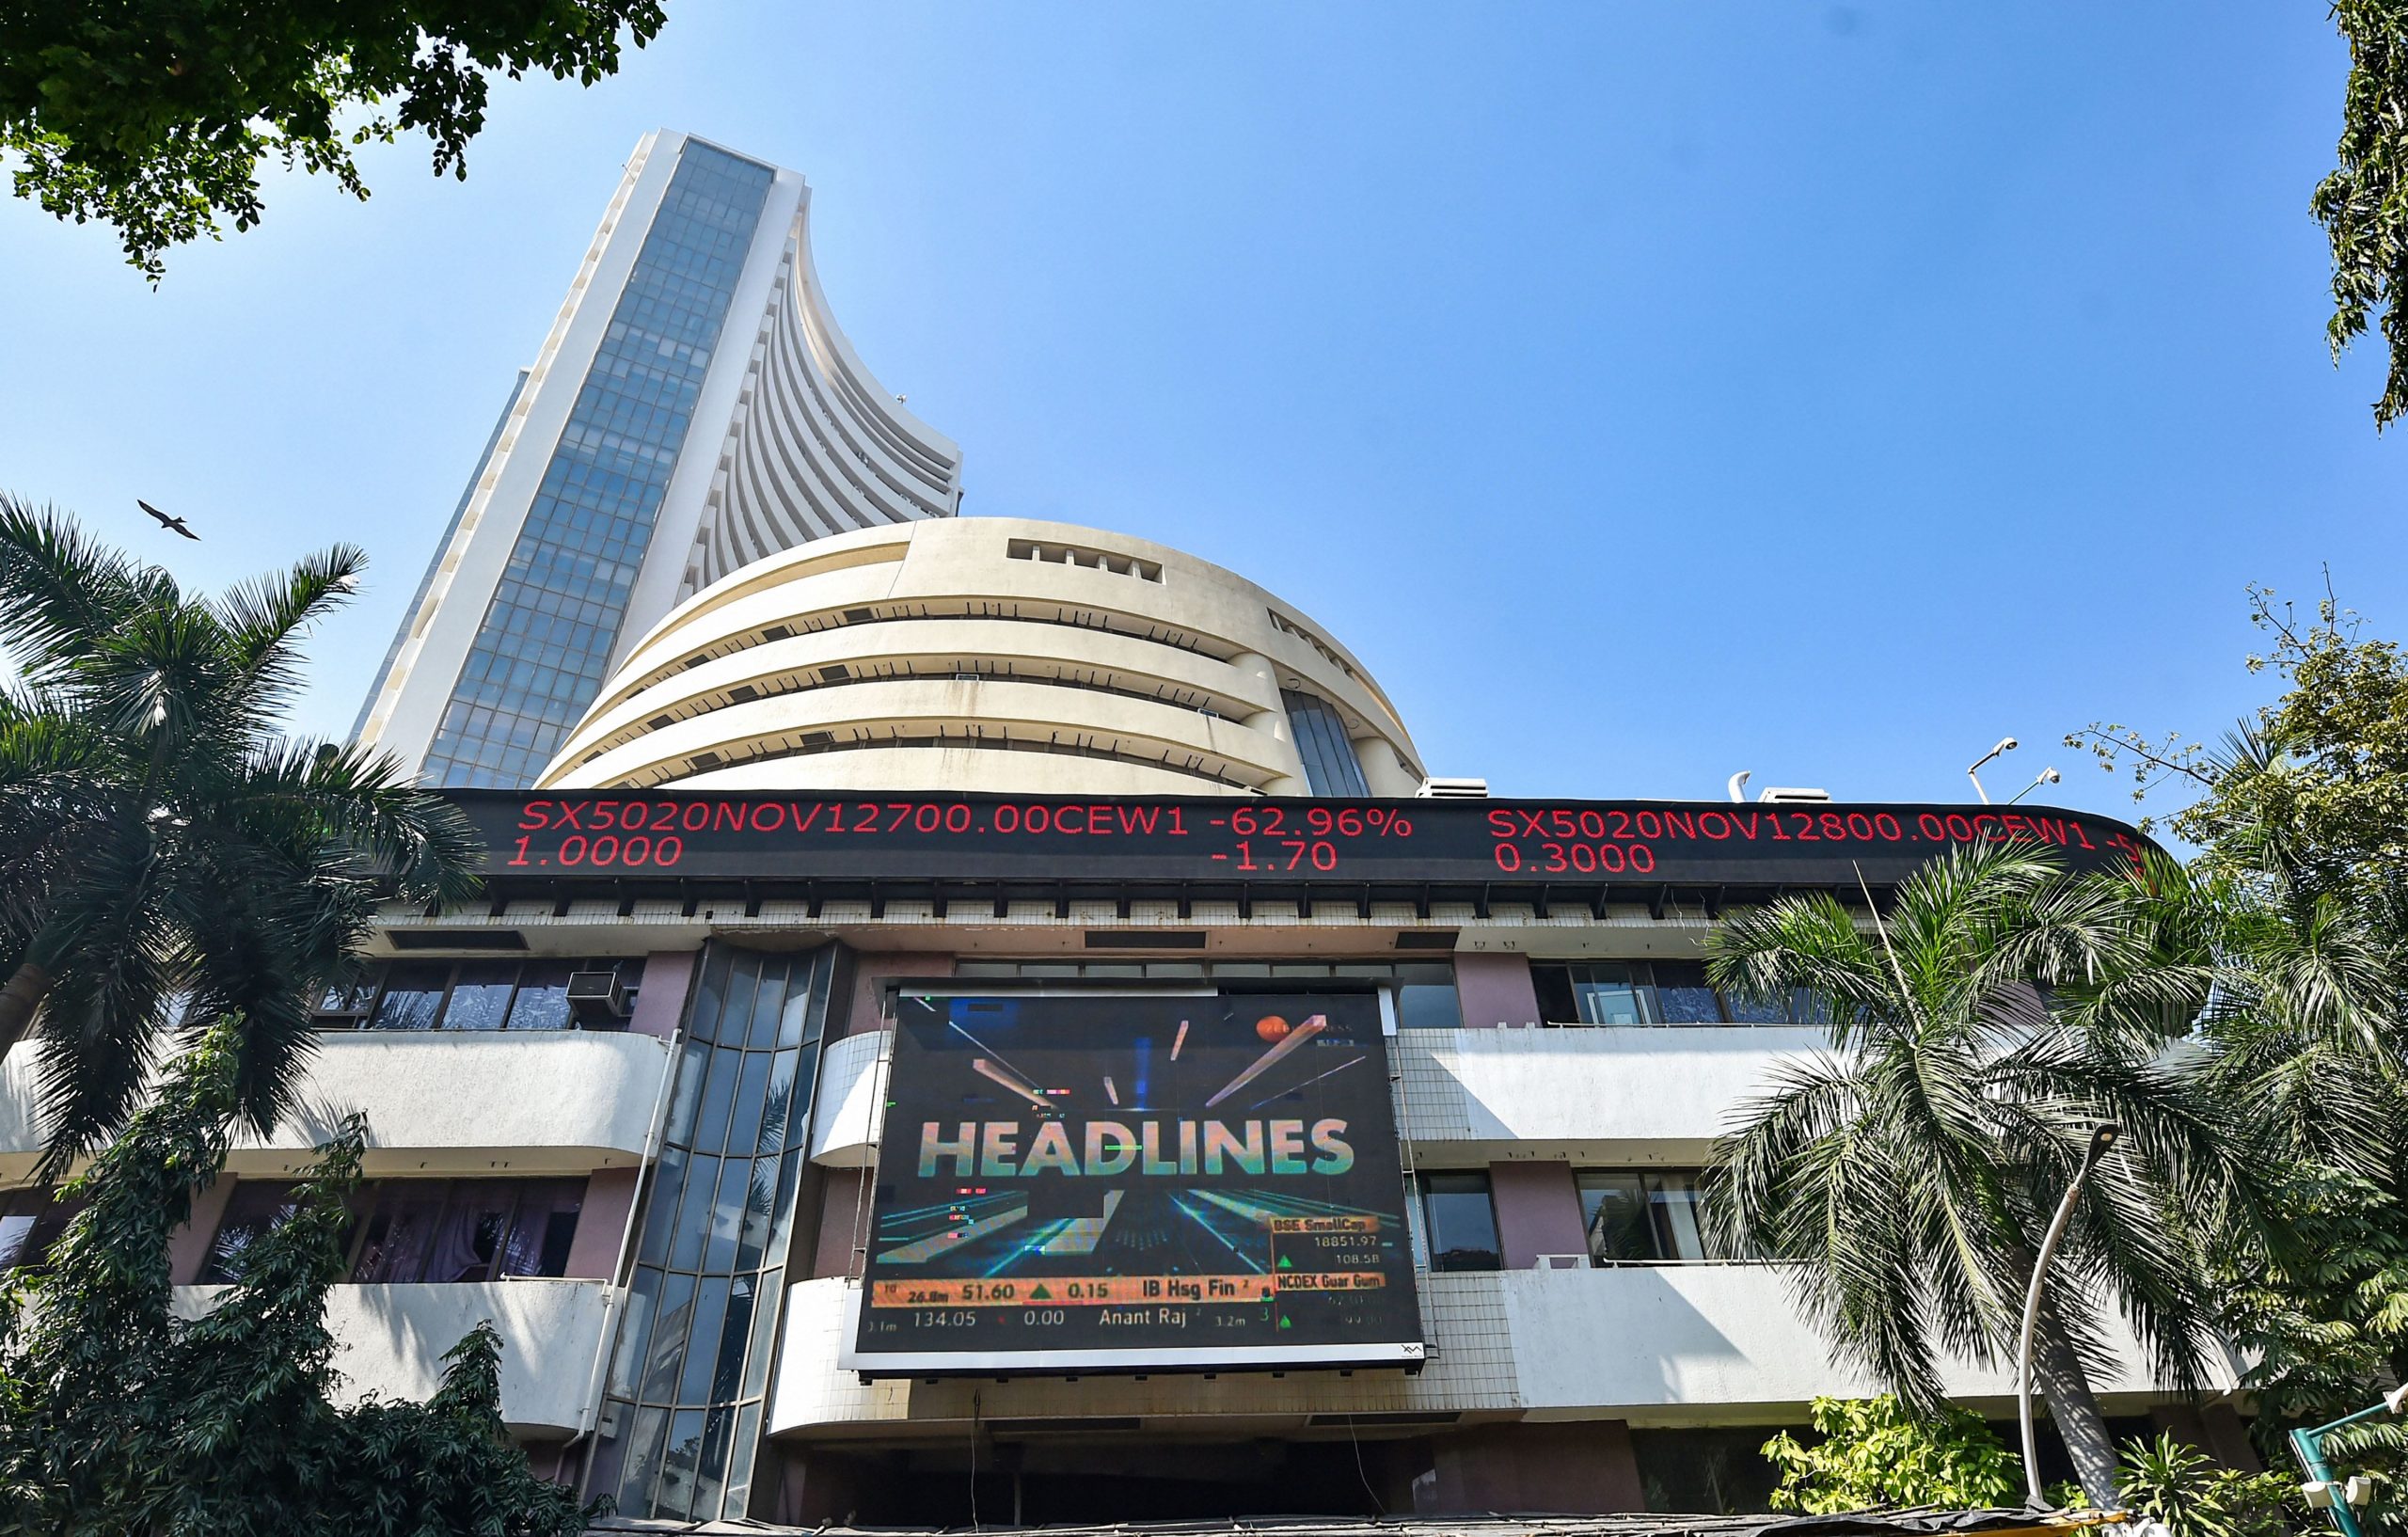 Trending Stocks: Aether, UltraTech, MTAR and others in news today